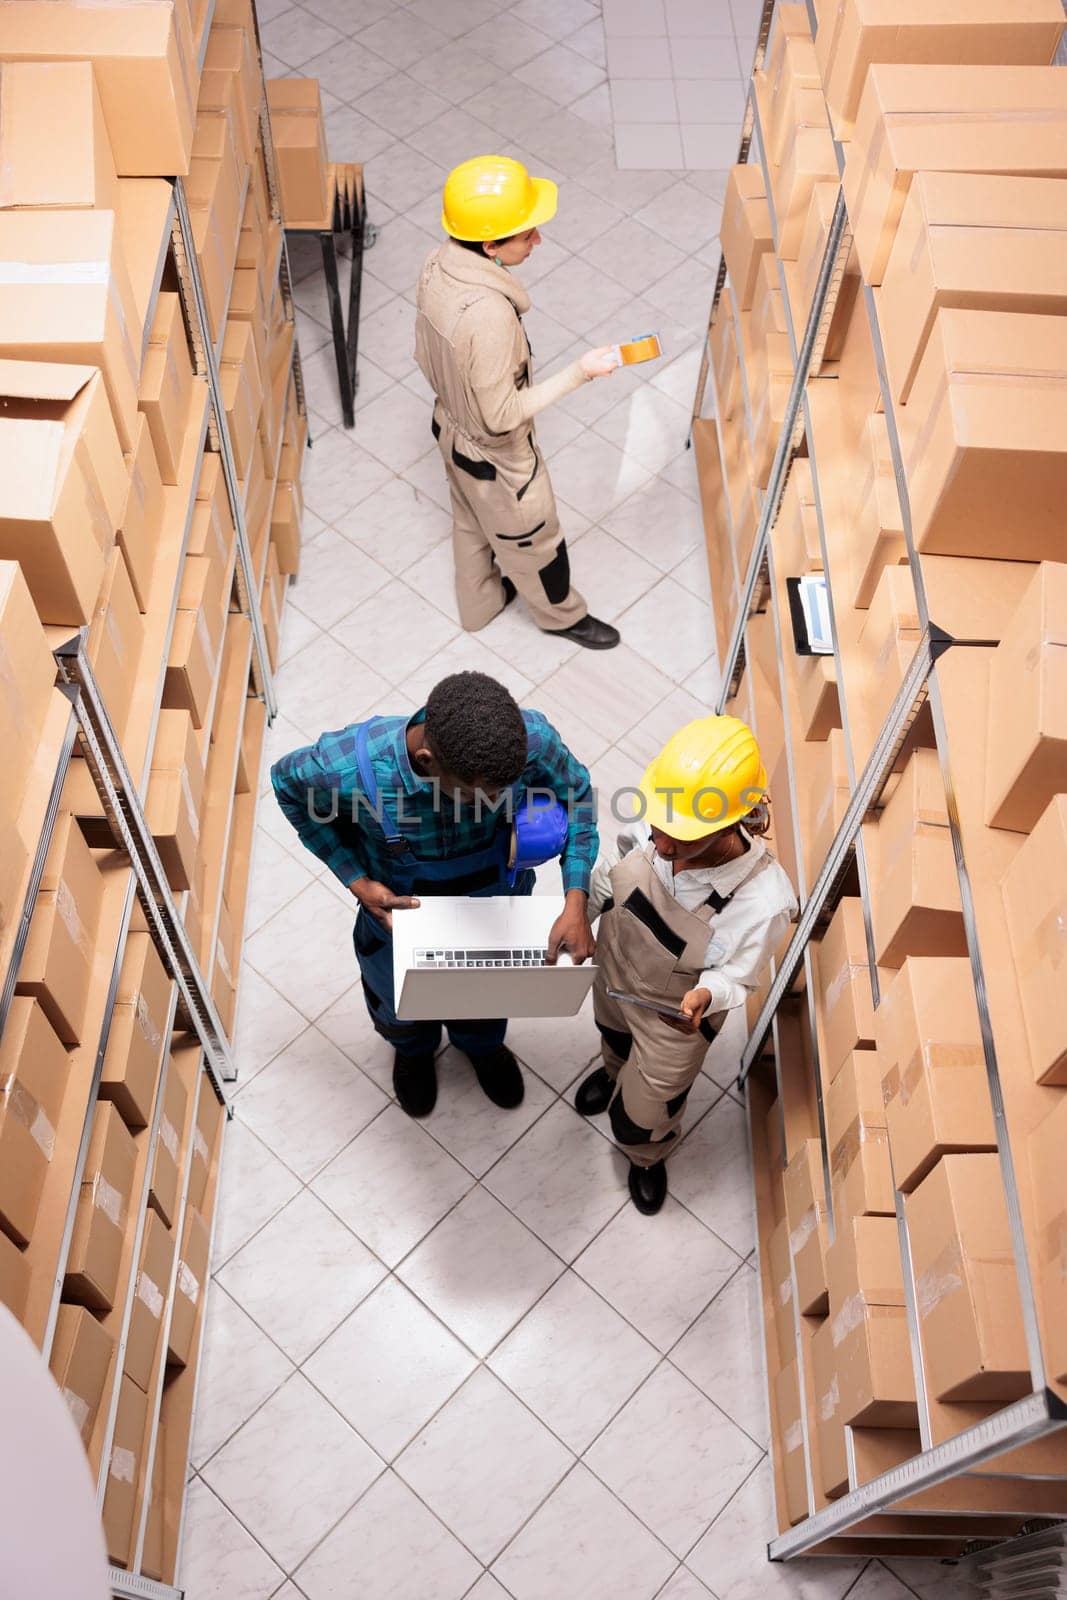 Storage room employees checking parcel delivery invoice on laptop by DCStudio